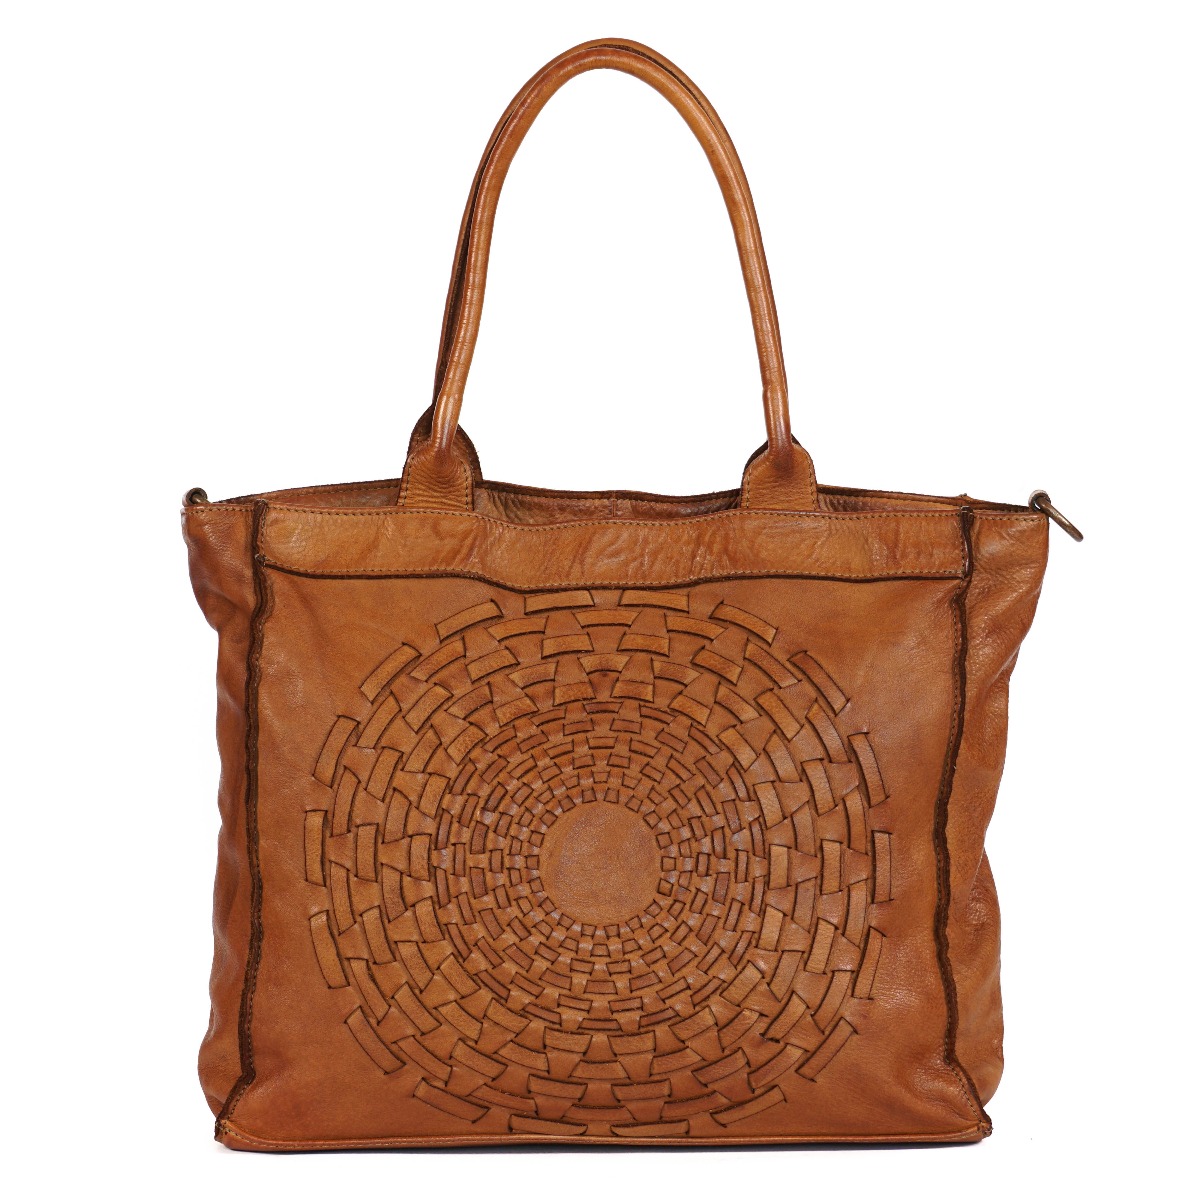 Woven leather women tote bag in cognac color